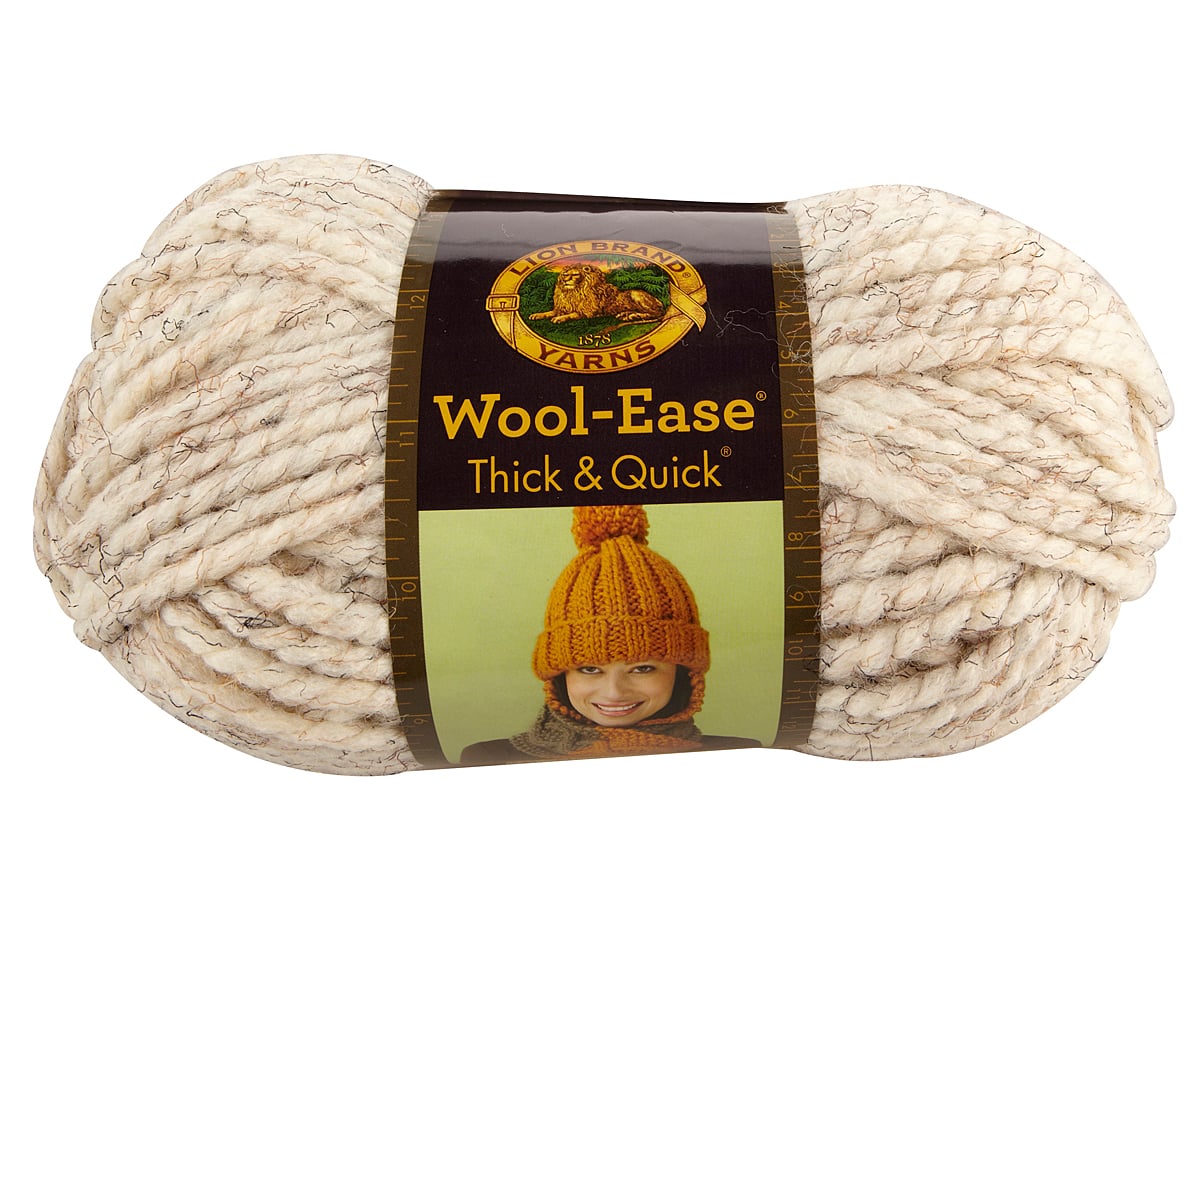 3 Pack) Lion Brand Yarn 640-099 Wool-Ease Thick & Quick Bulky Yarn